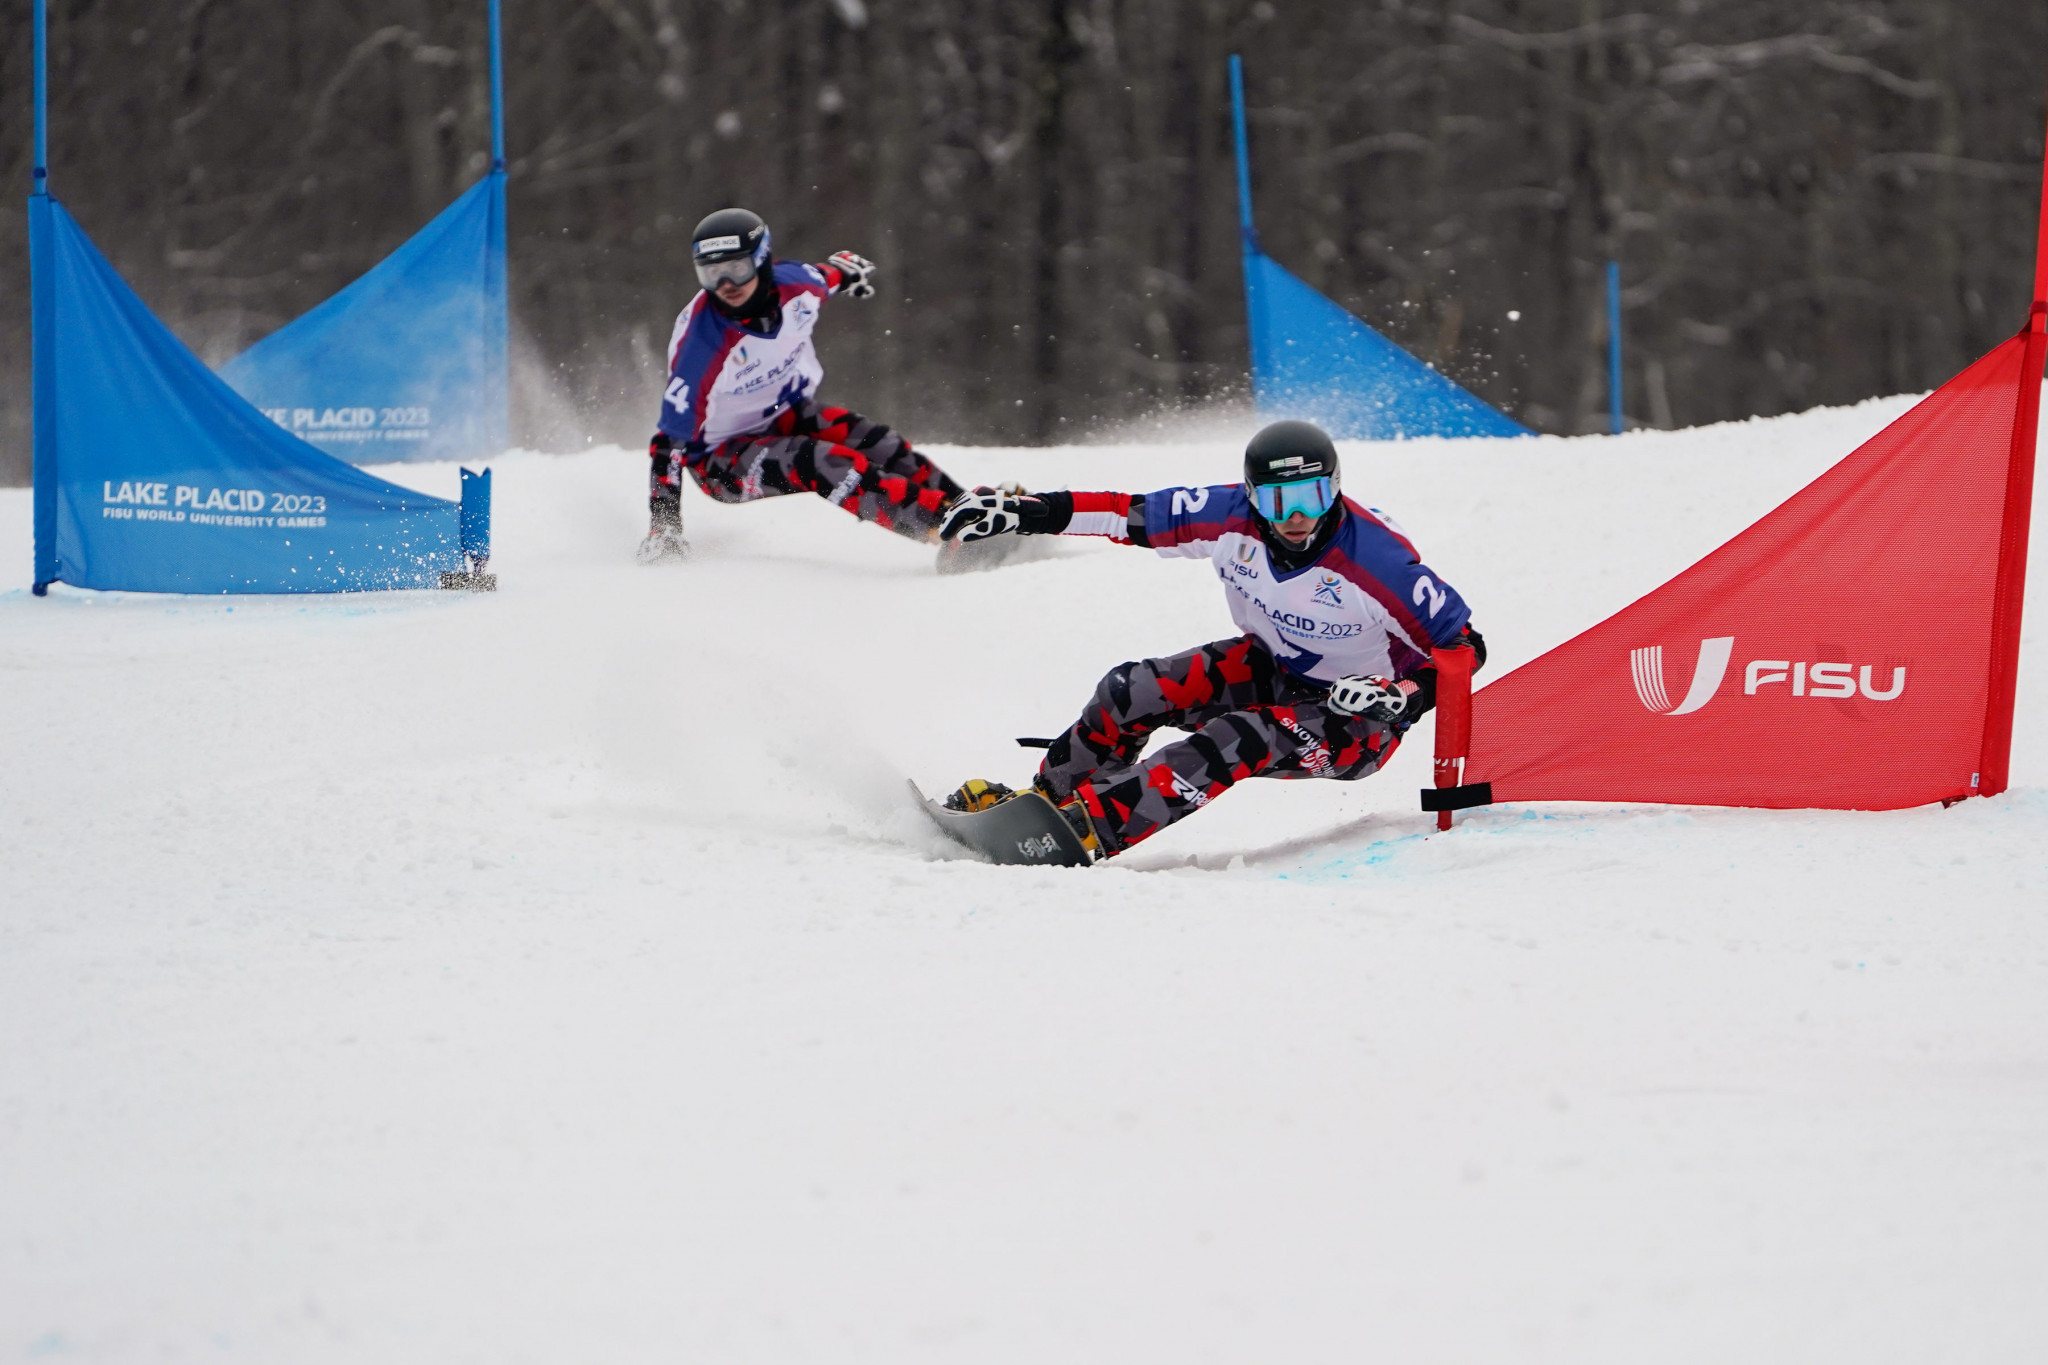 Austrian duo take snowboard double on final day of Lake Placid 2023